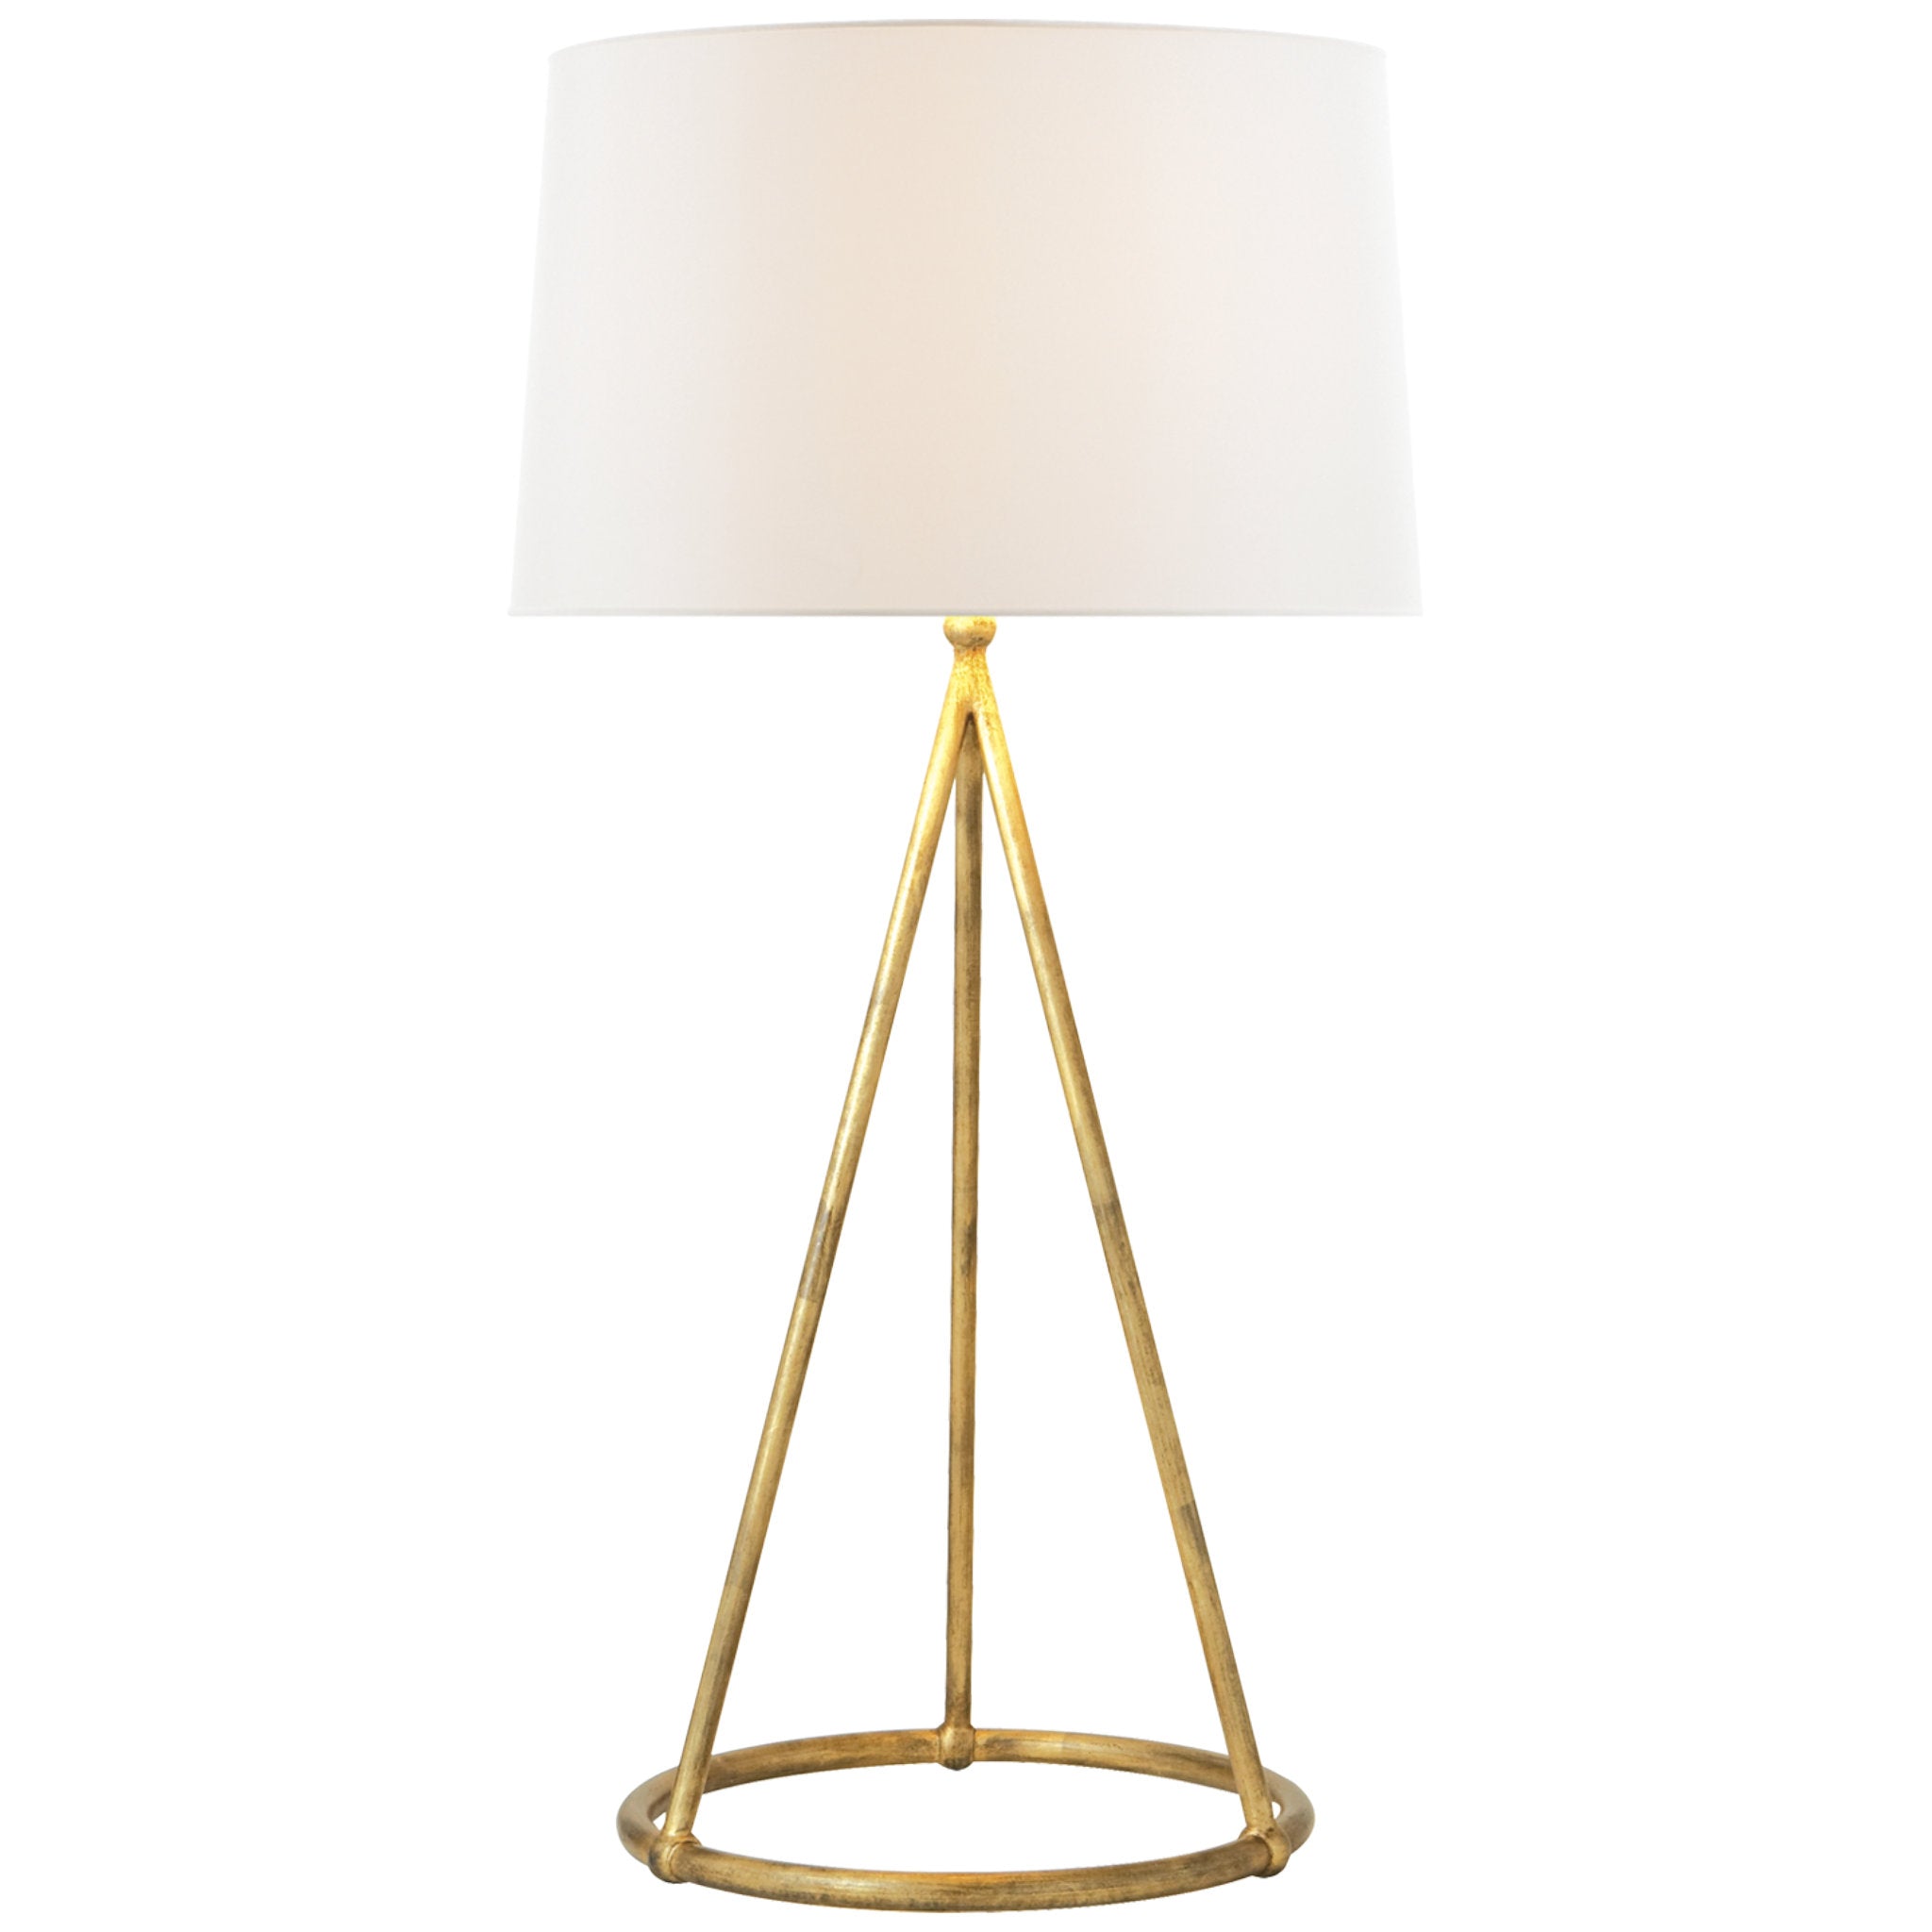 Thomas O'Brien Nina Tapered Table Lamp in Gilded Iron with Linen Shade